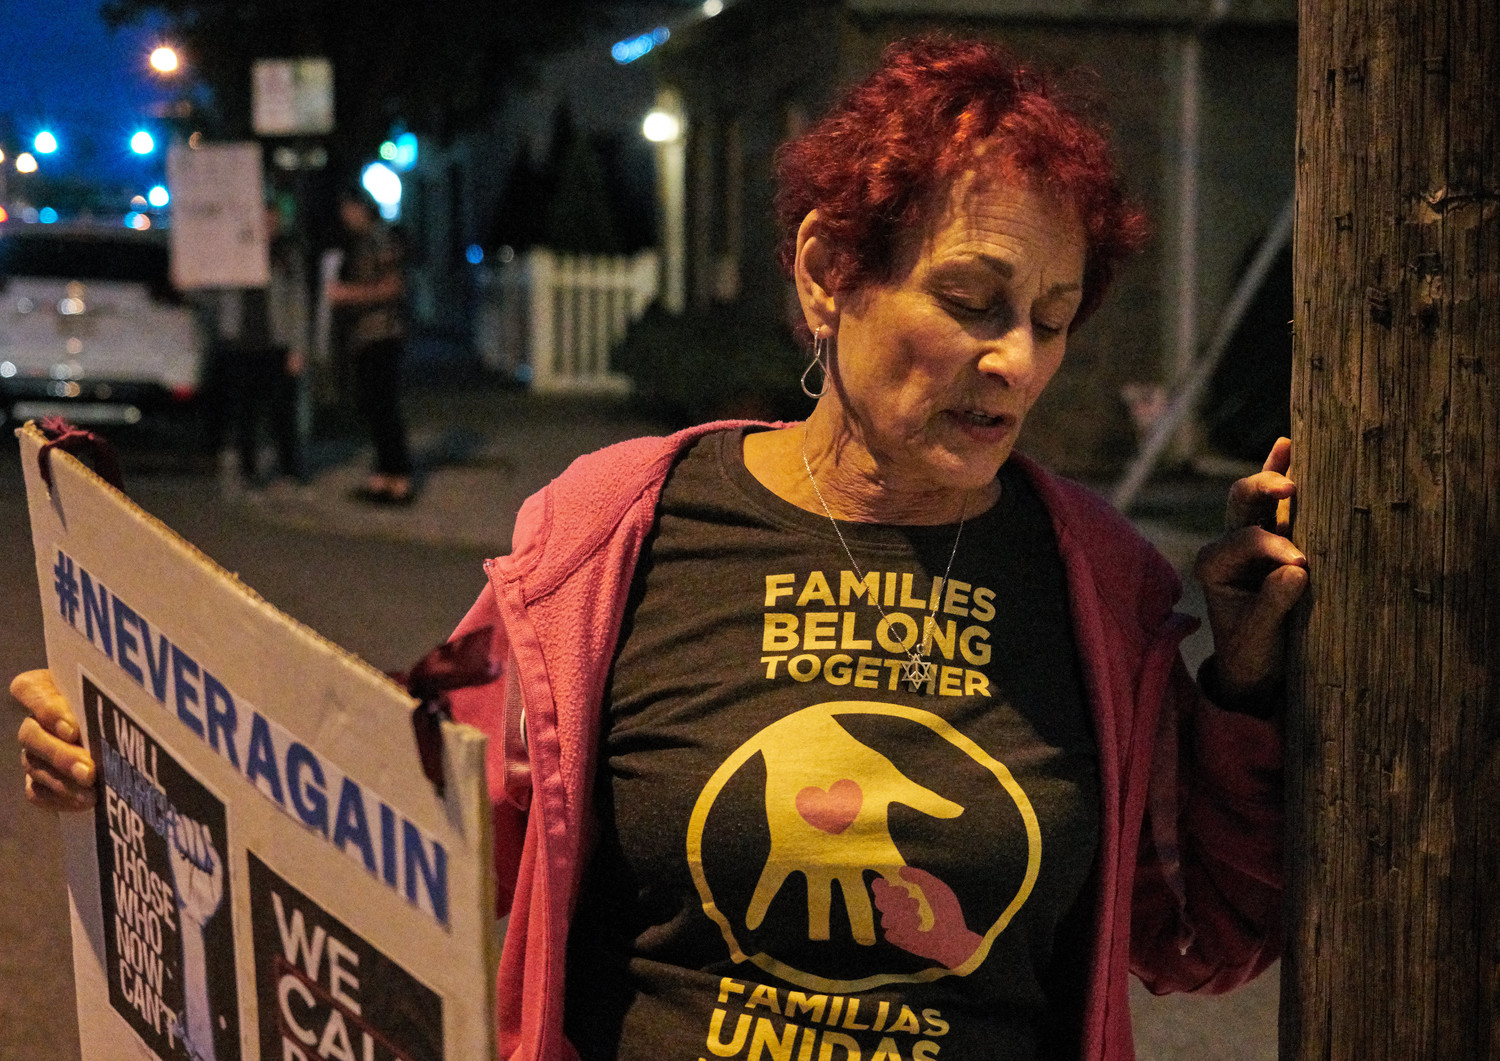 Judi Gardner, of Huntington, protested outside the Inn at New Hyde Park during the annual Nassau Friends of NRA fundraiser on Sept. 27.